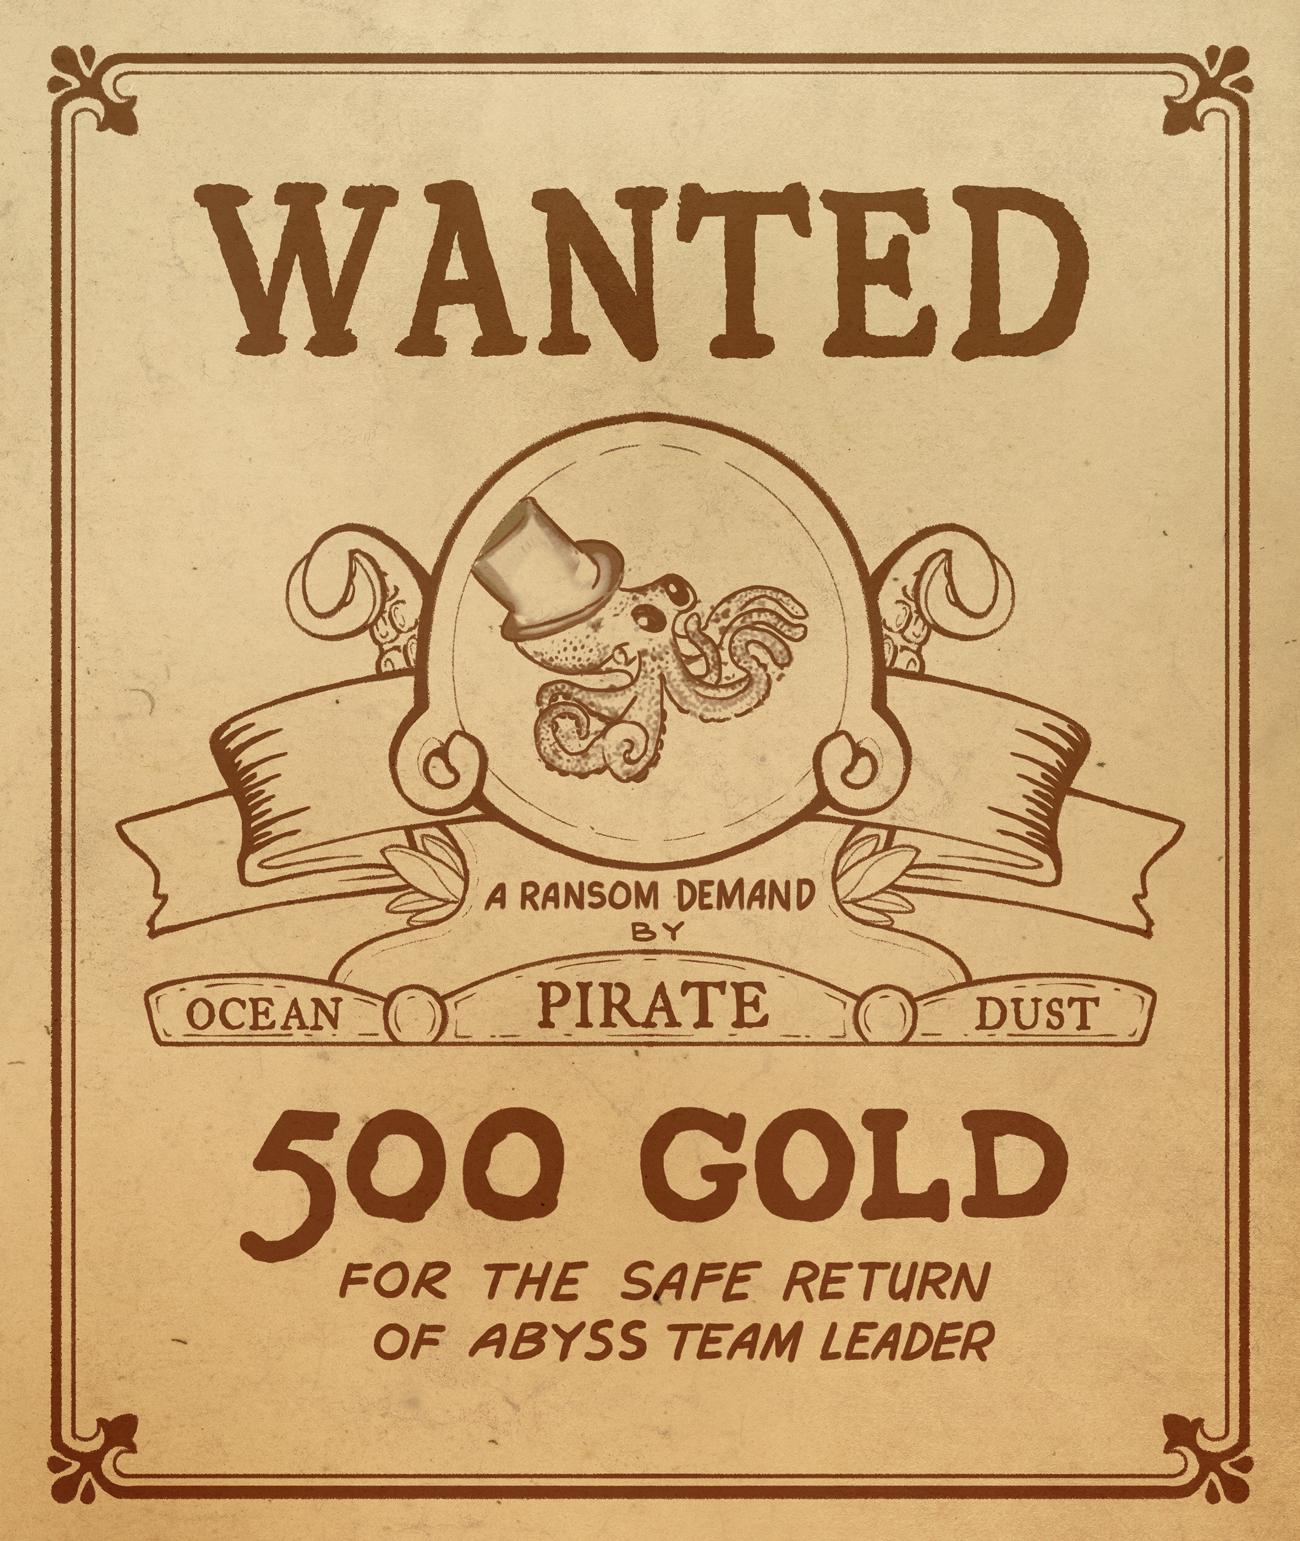 Wanted Poster for Abyss Team Captain